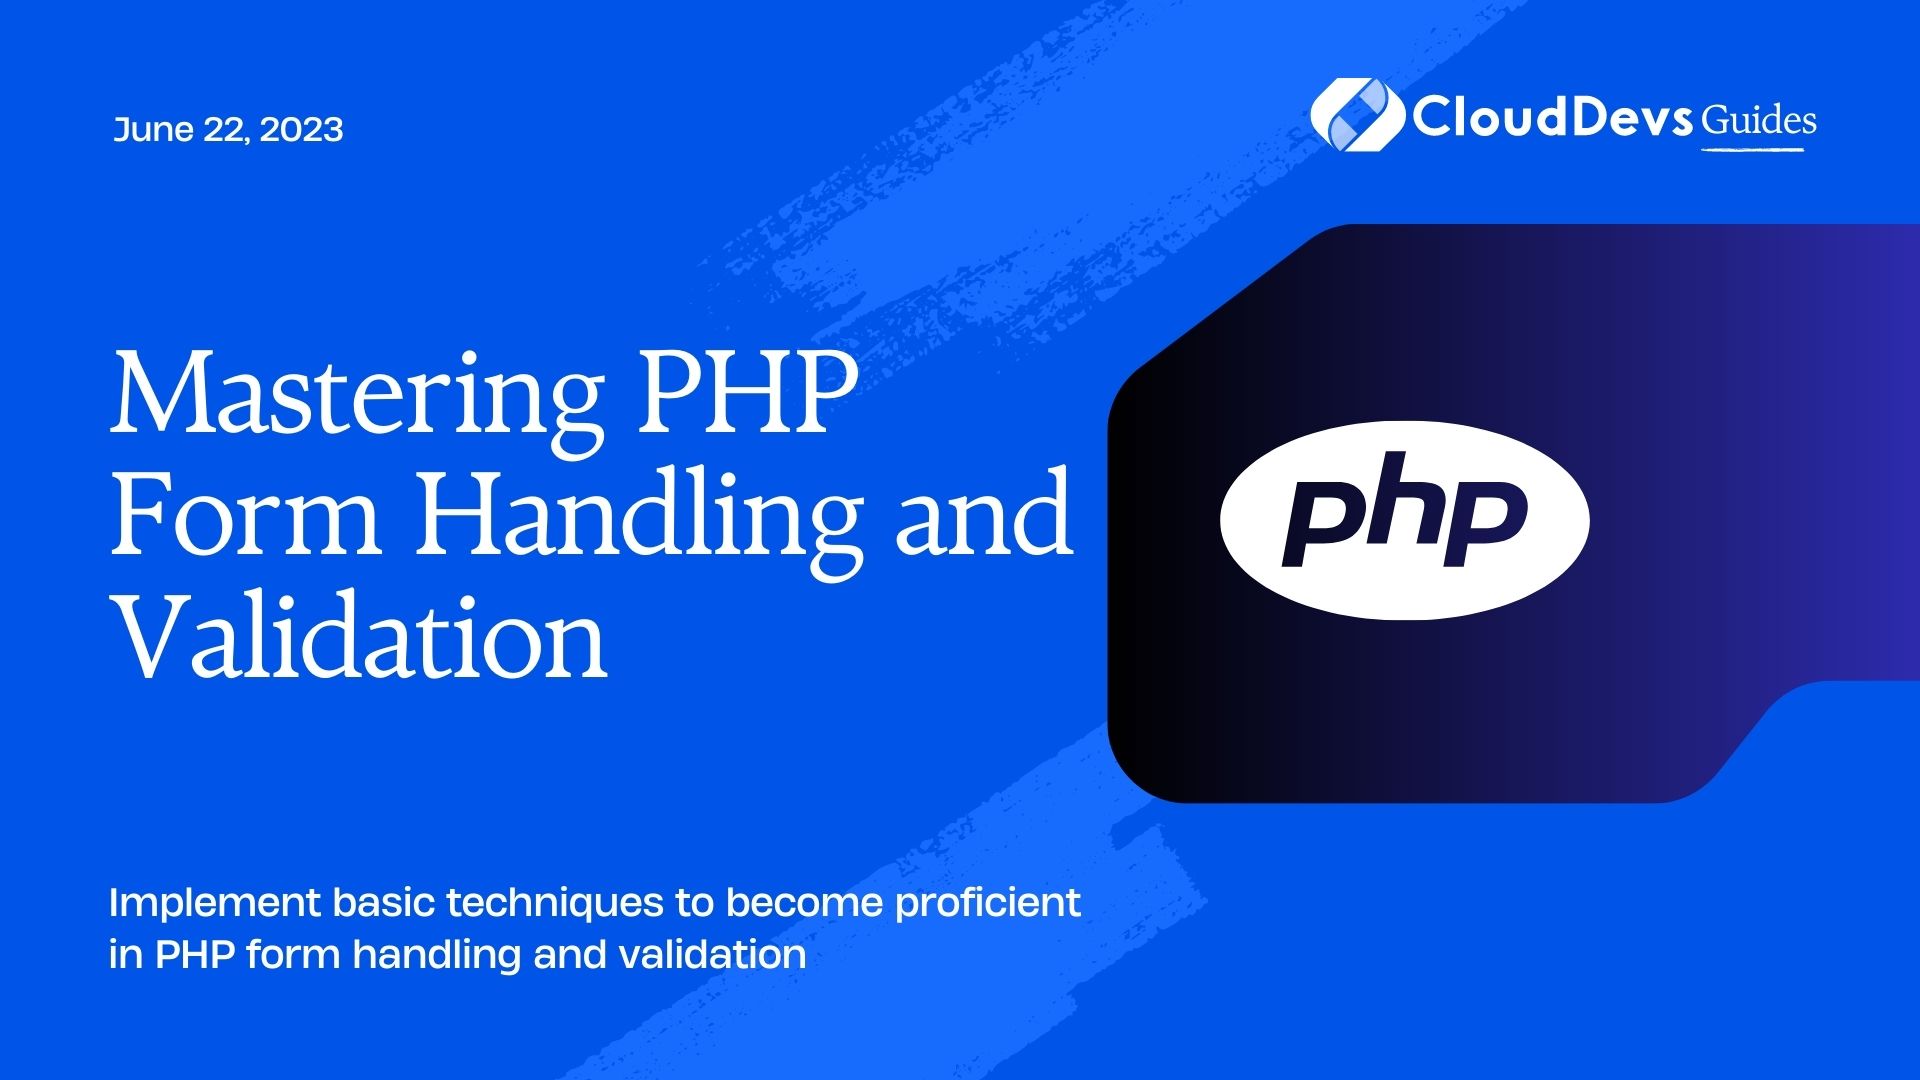 Mastering PHP Form Handling and Validation